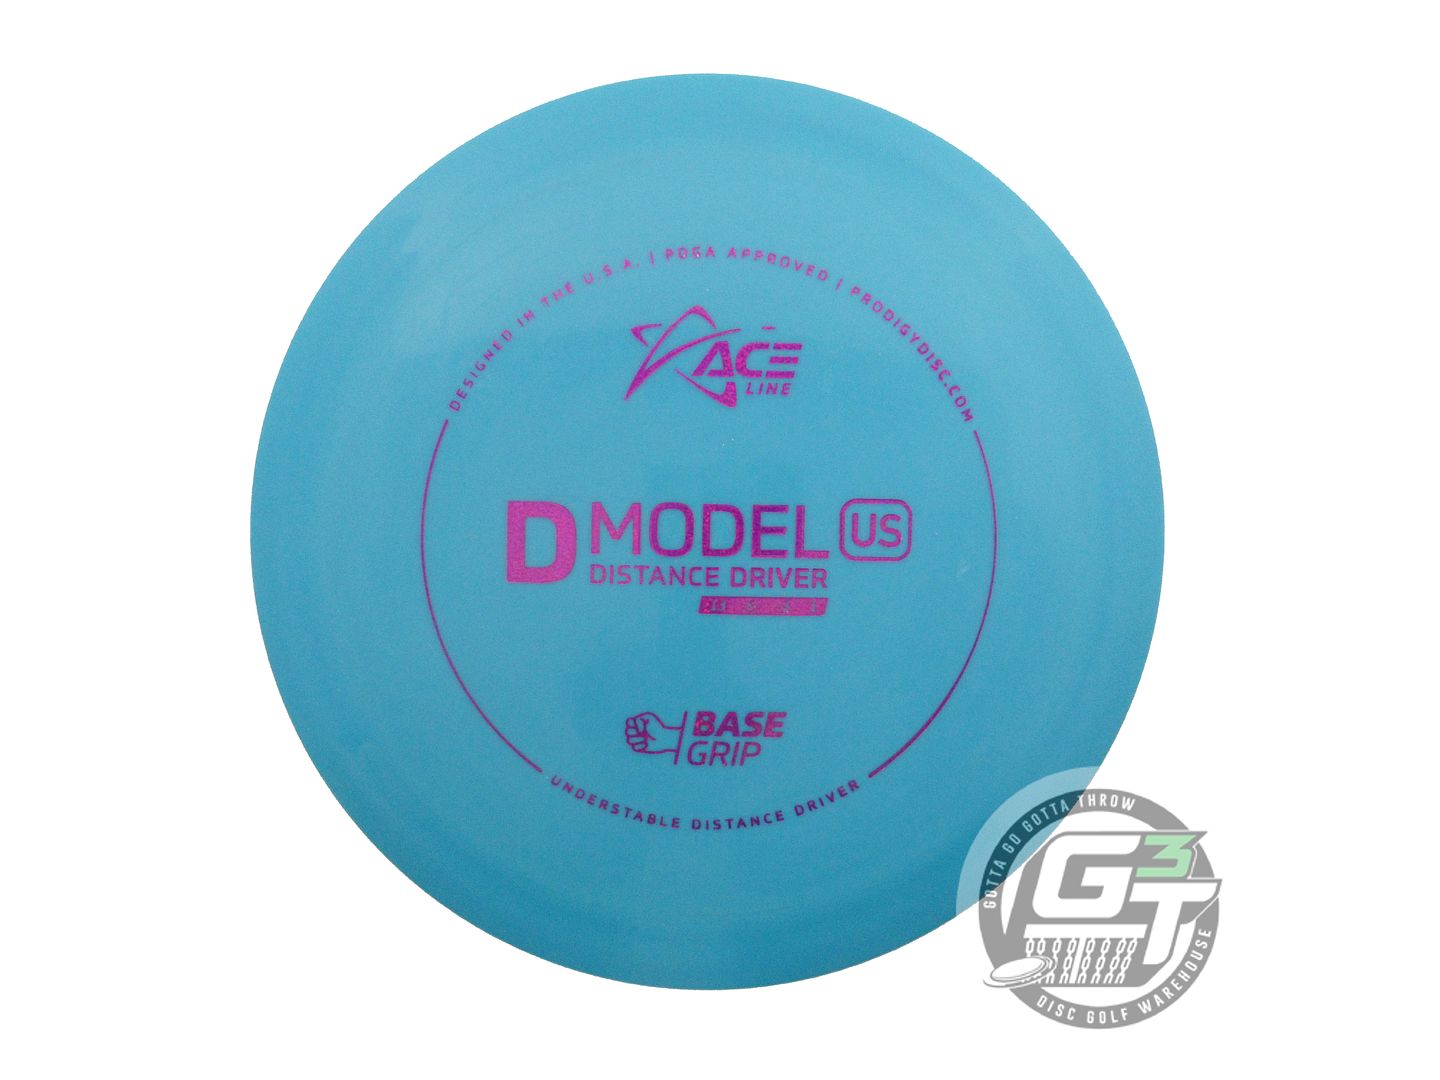 Prodigy Ace Line Base Grip D Model US Distance Driver Golf Disc (Individually Listed)